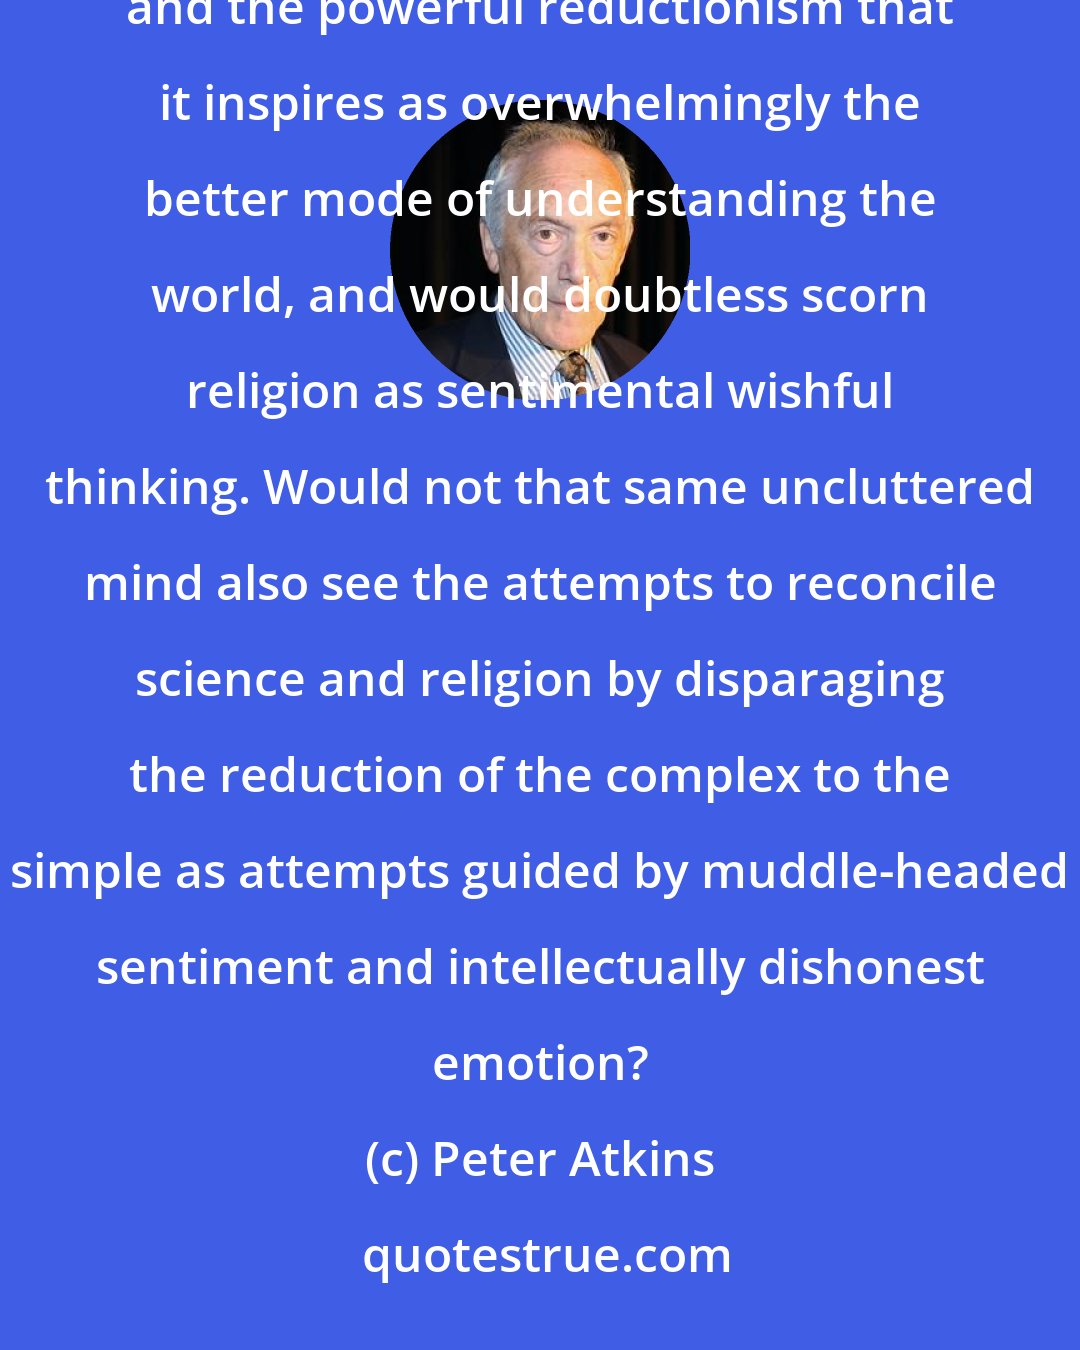 Peter Atkins: Someone with a fresh mind, one not conditioned by upbringing and environment, would doubtless look at science and the powerful reductionism that it inspires as overwhelmingly the better mode of understanding the world, and would doubtless scorn religion as sentimental wishful thinking. Would not that same uncluttered mind also see the attempts to reconcile science and religion by disparaging the reduction of the complex to the simple as attempts guided by muddle-headed sentiment and intellectually dishonest emotion?